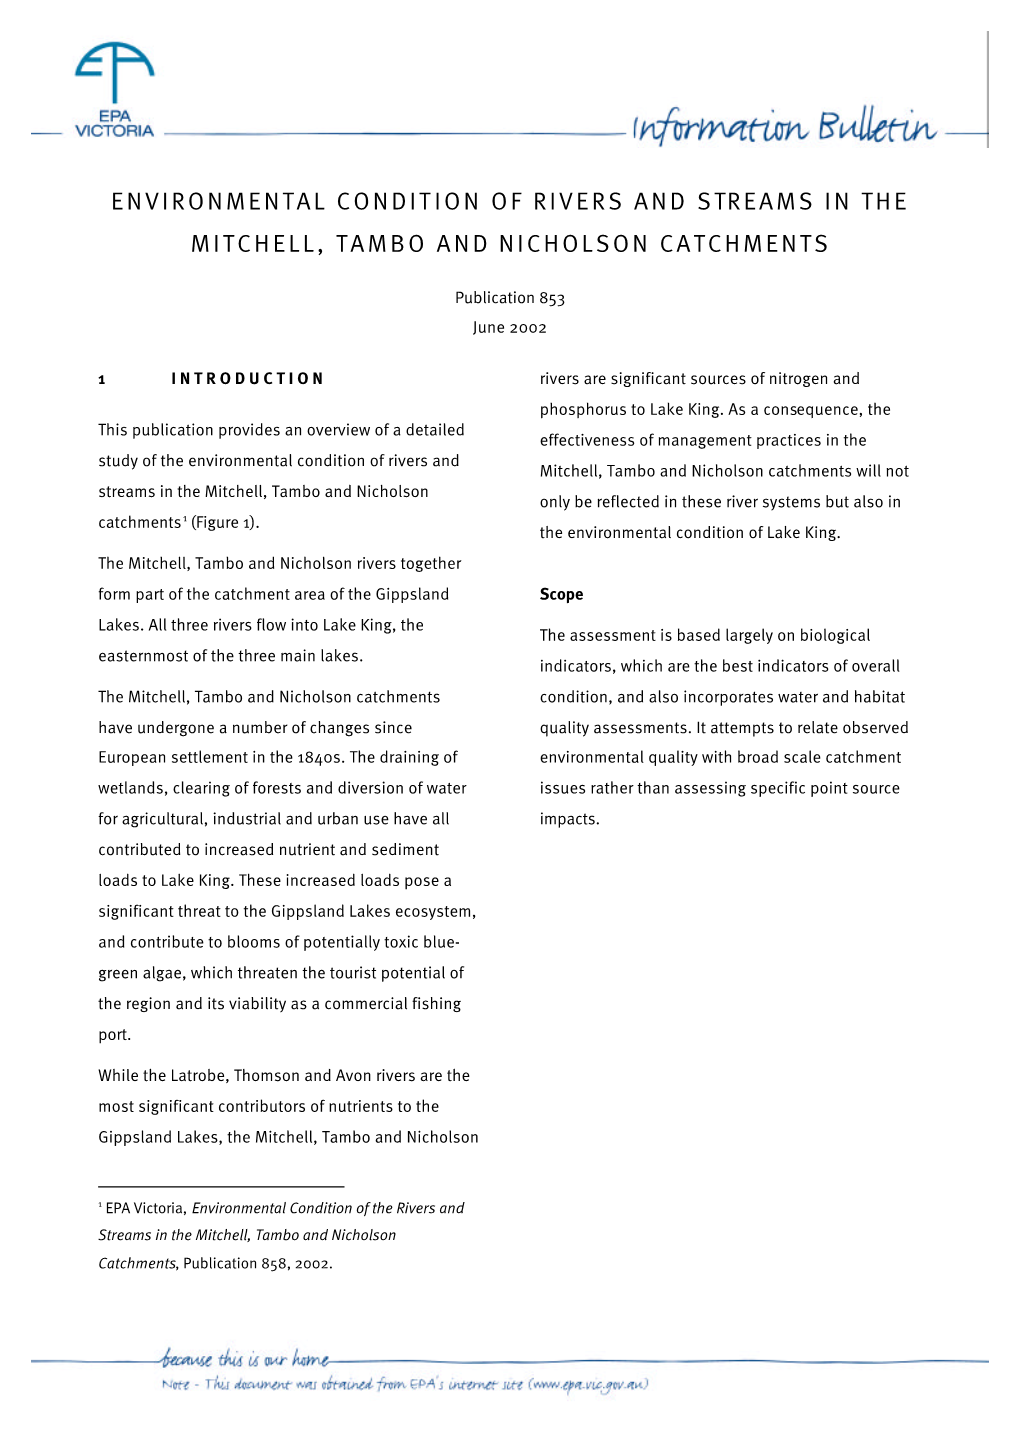 Environmental Condition of Rivers and Streams in the Mitchell, Tambo and Nicholson Catchments